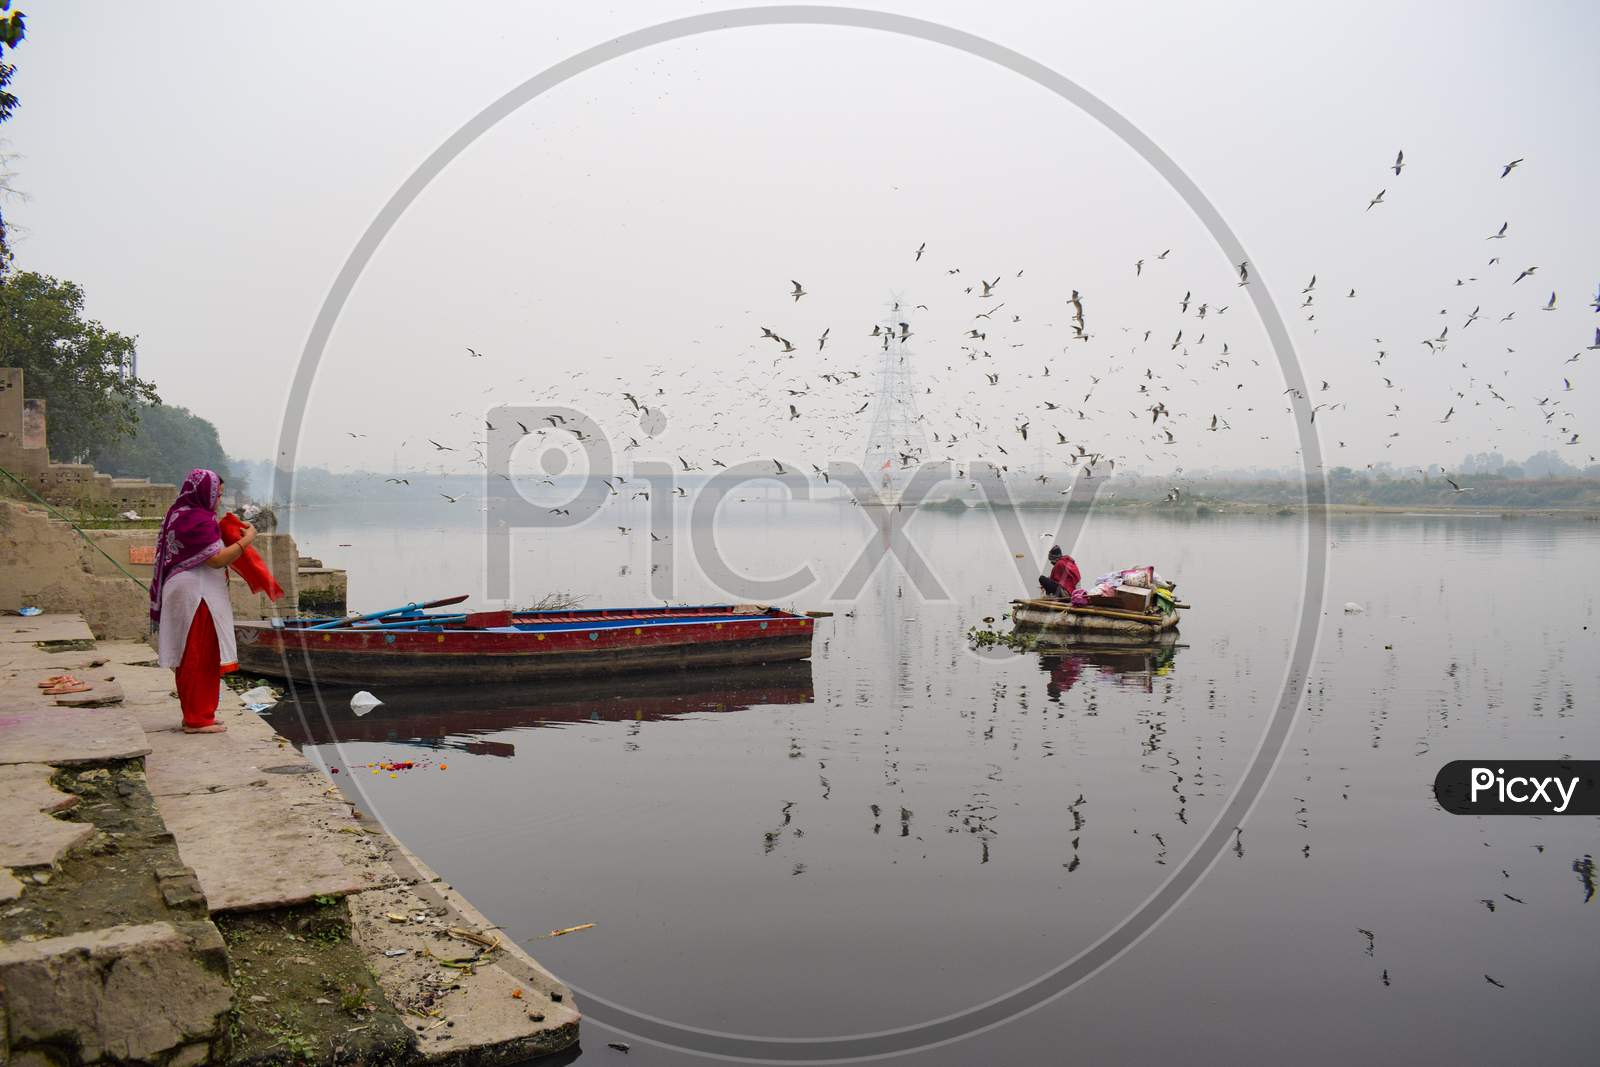 A man rowing a boat, A woman immersing flowers in Yamuna, Migratory birds flying around and a boat at Yamuna Ghat